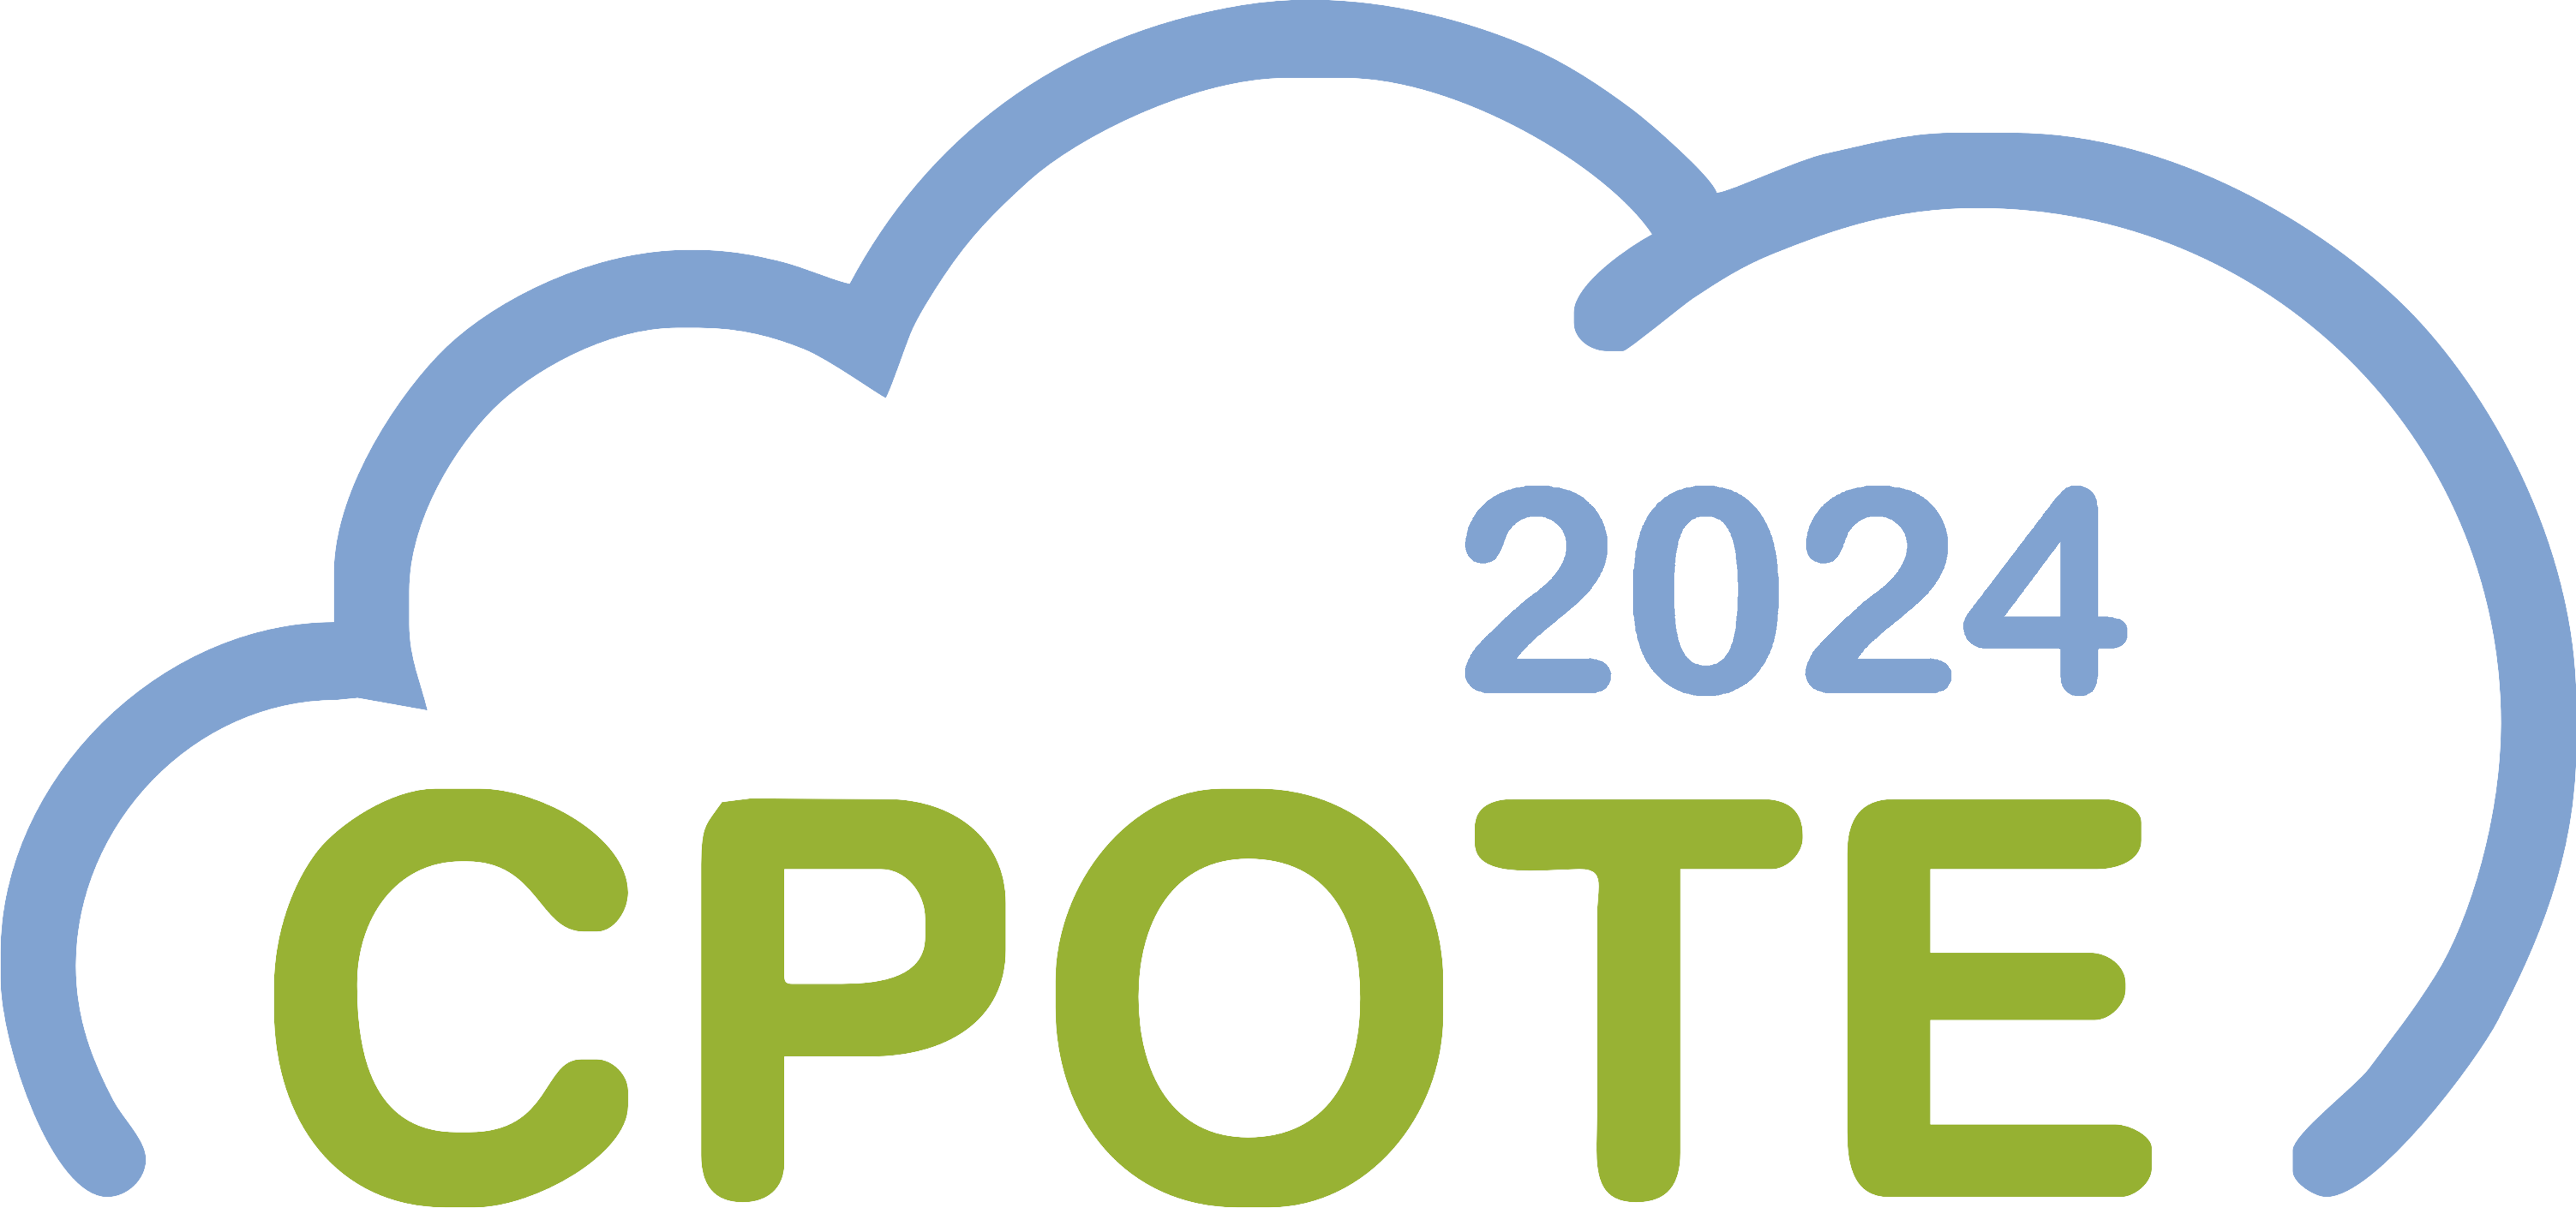 conference cpote2024 logo